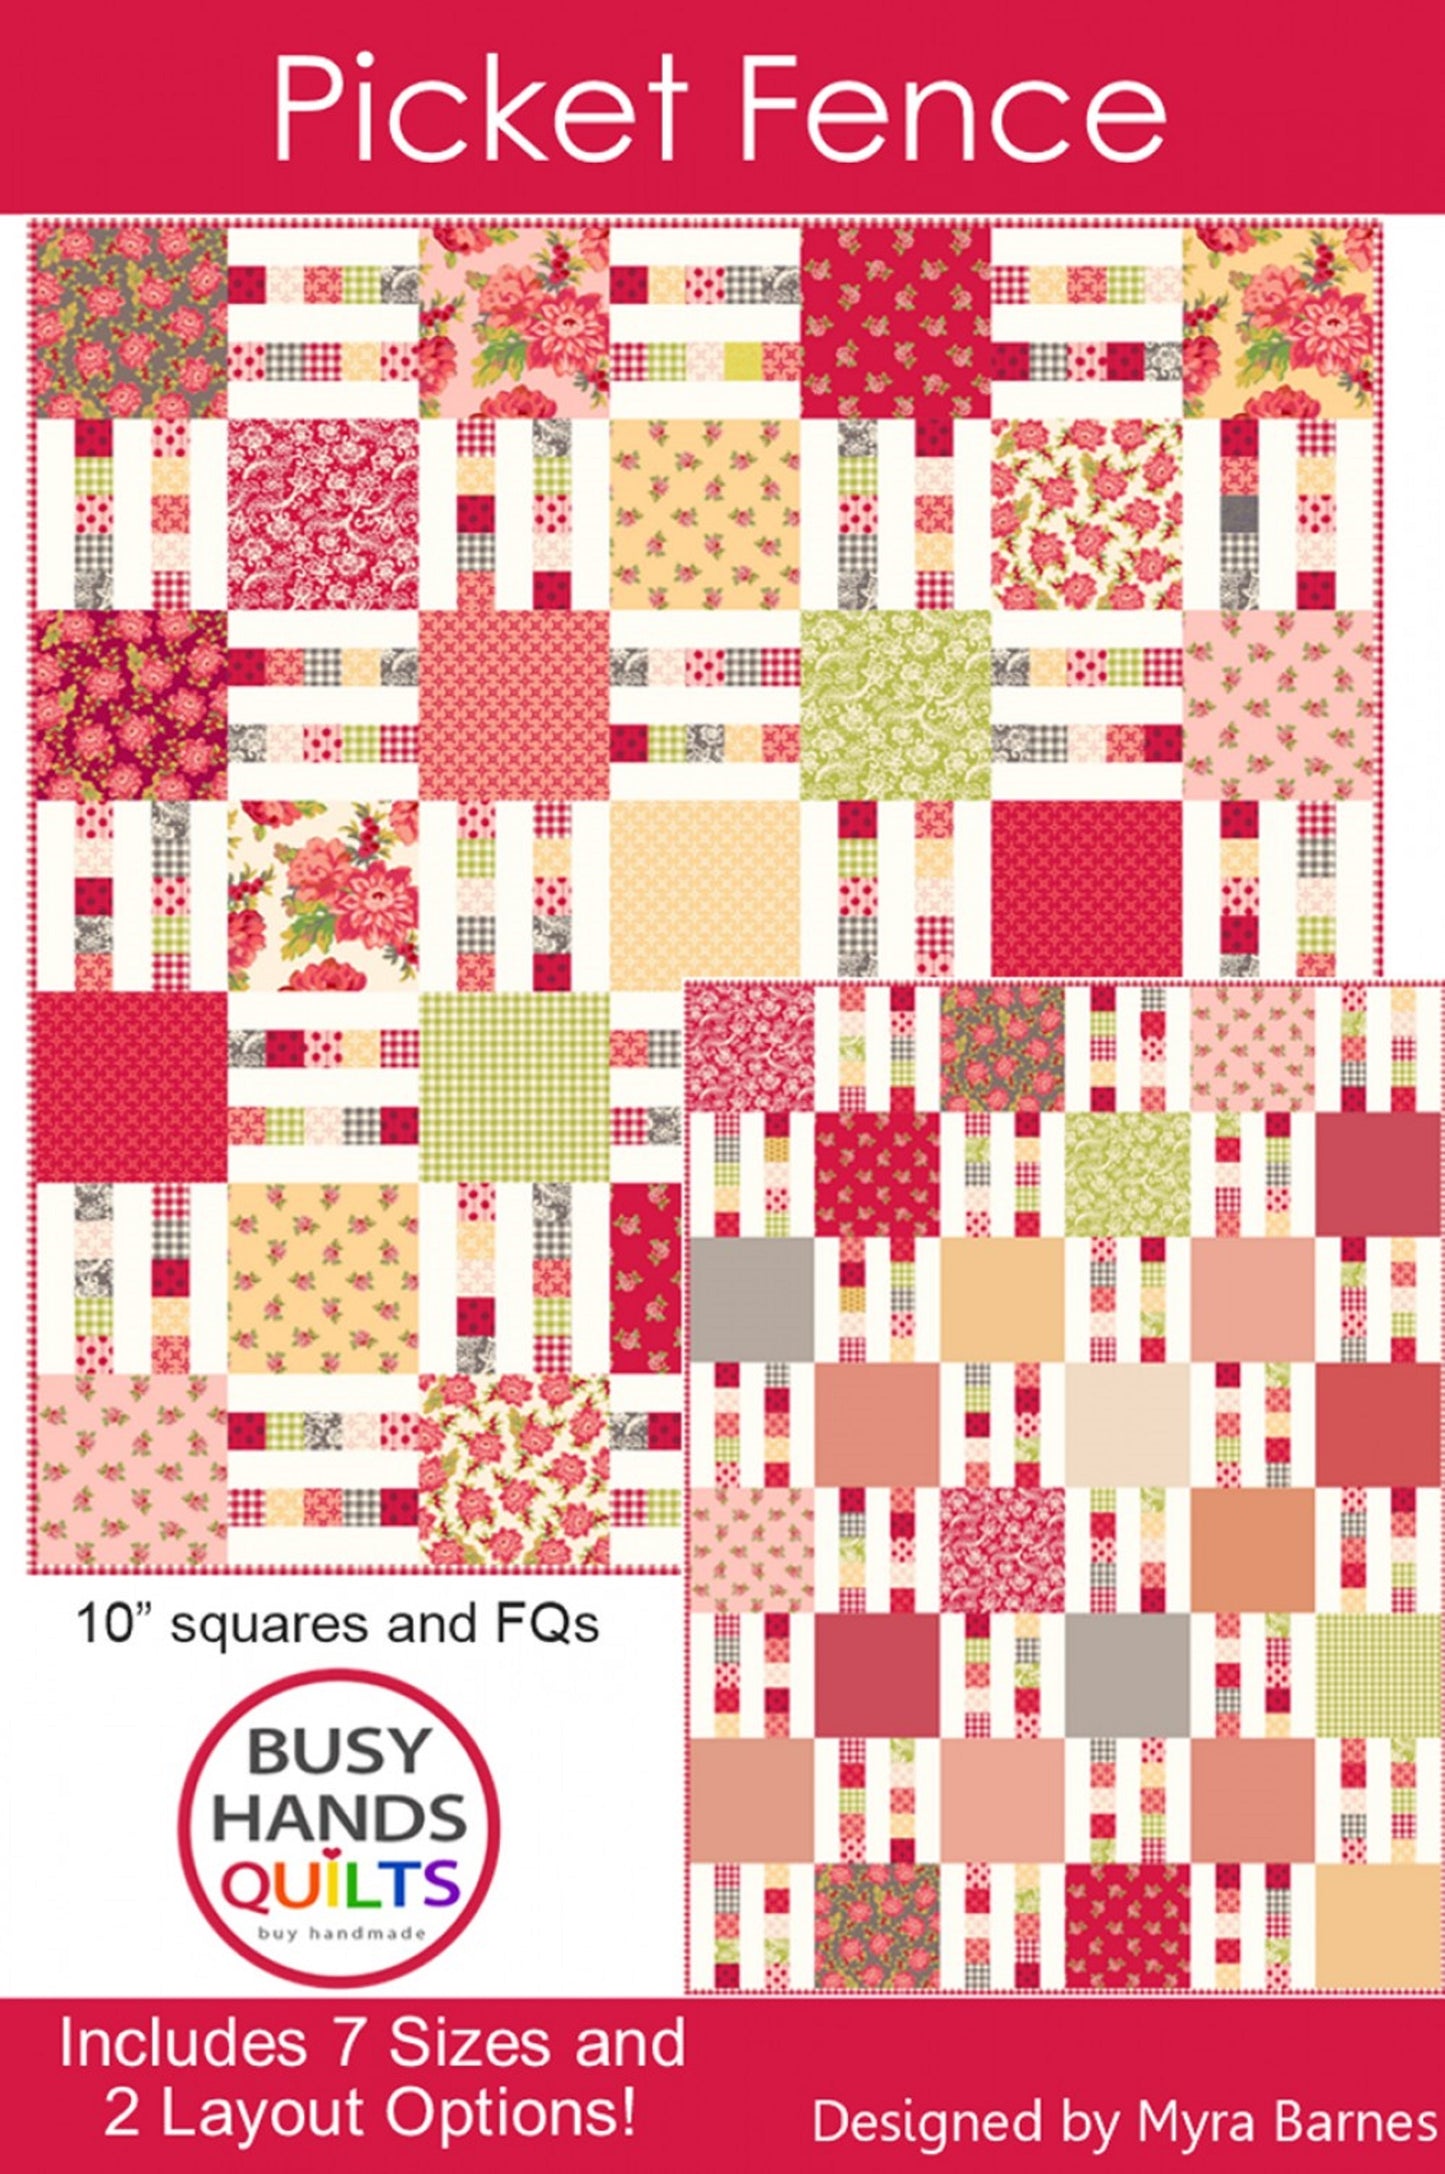 Picket Fence Quilt Pattern by Busy Hands Quilts-7 Sizes + 2 Layouts